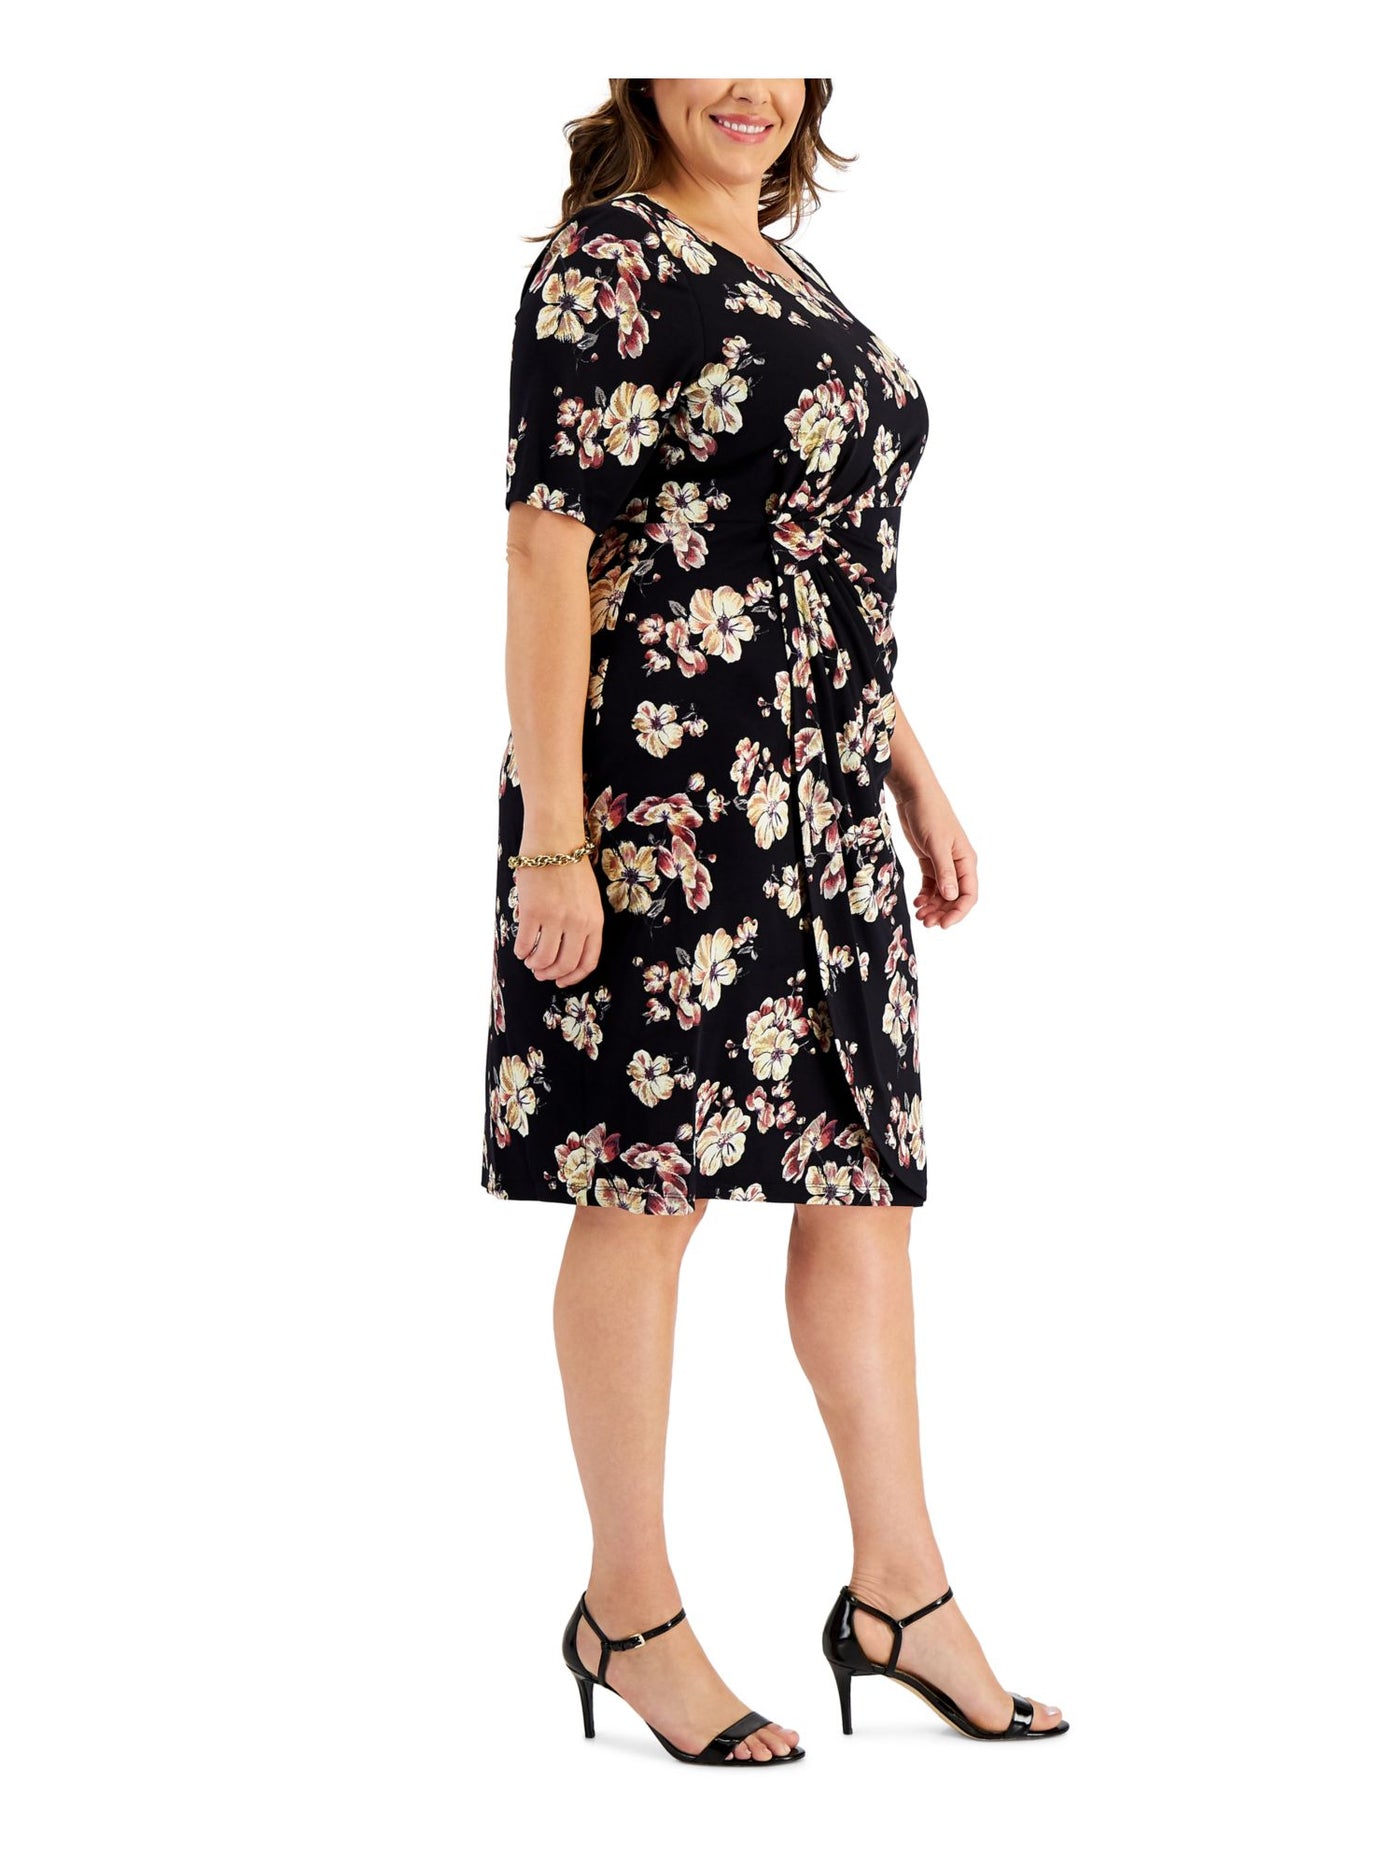 CONNECTED APPAREL Womens Black Textured Gathered Pullover Floral 3/4 Sleeve Round Neck Knee Length Sheath Dress Plus 22W